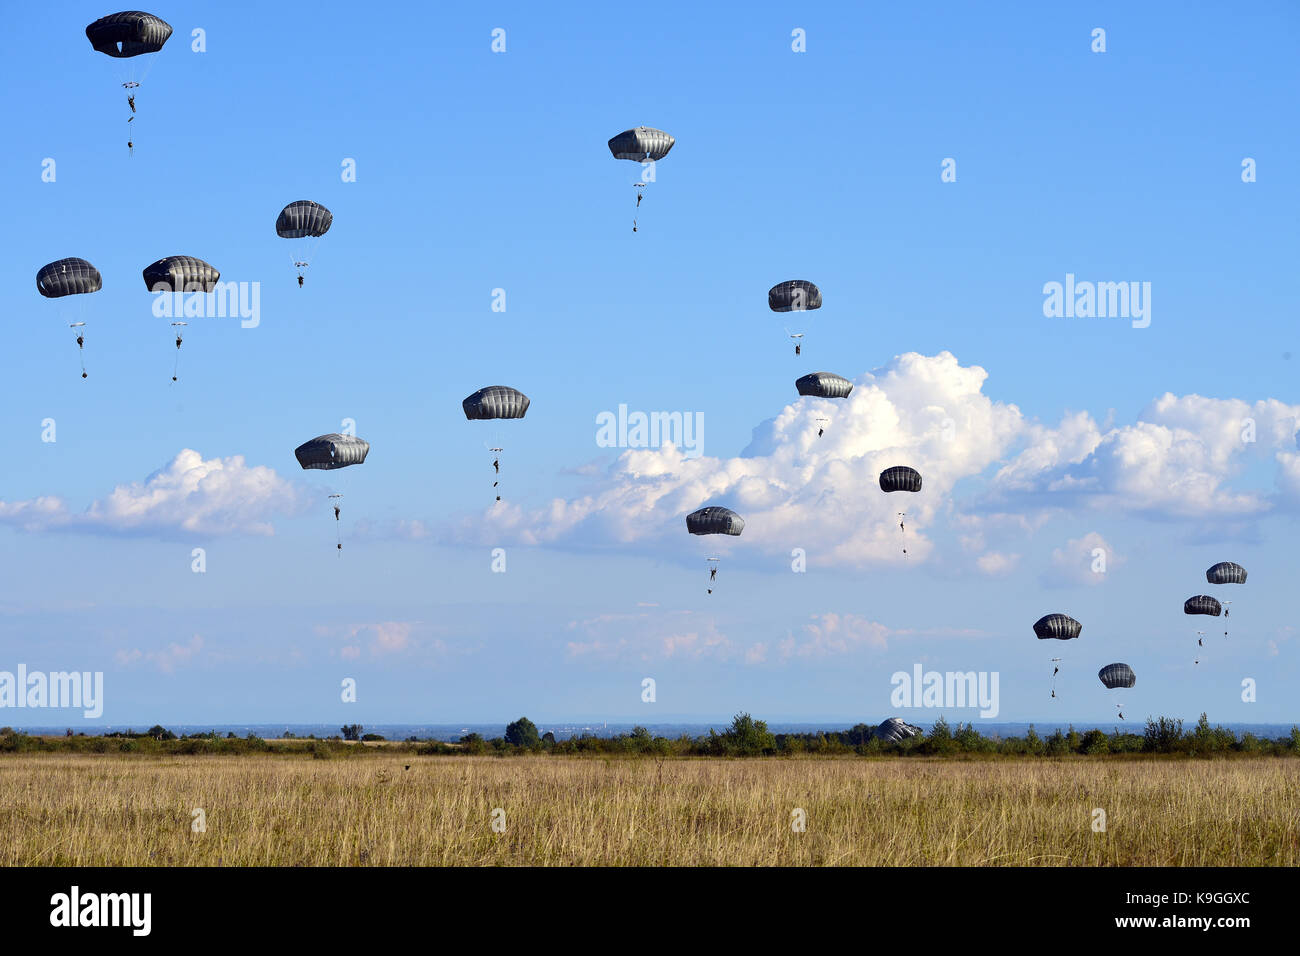 U.S. Army Paratroopers assigned to the Brigade Support Battalion, Stock Photo